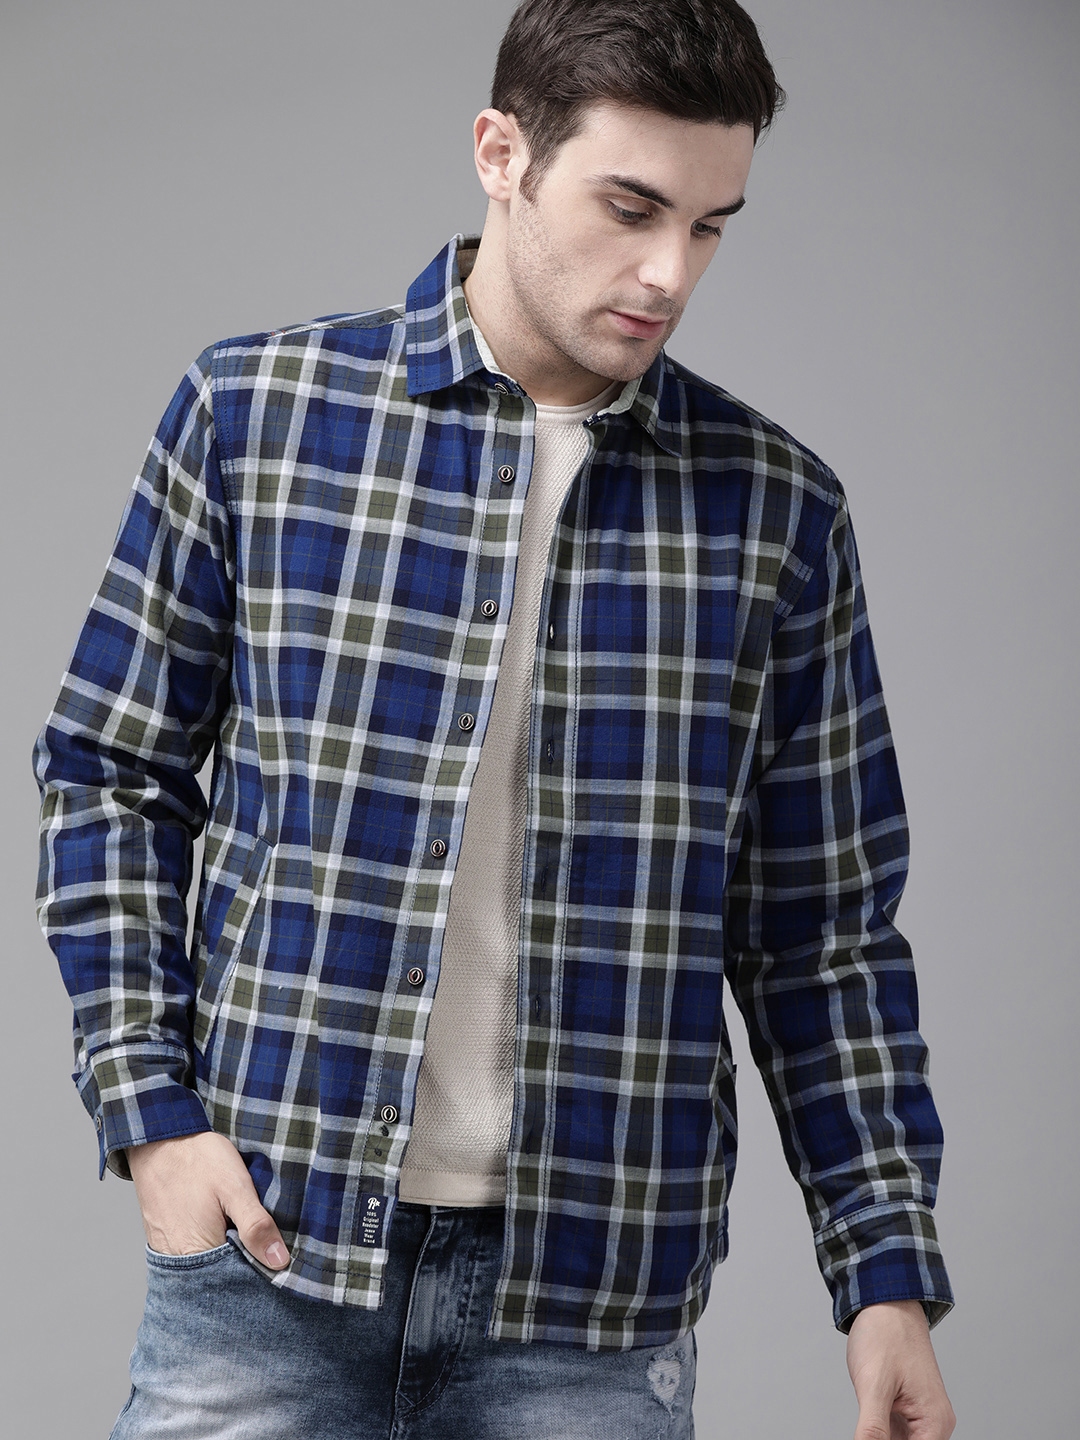 Buy The Roadster Lifestyle Co Men Blue & White Checked Tailored Flannel ...